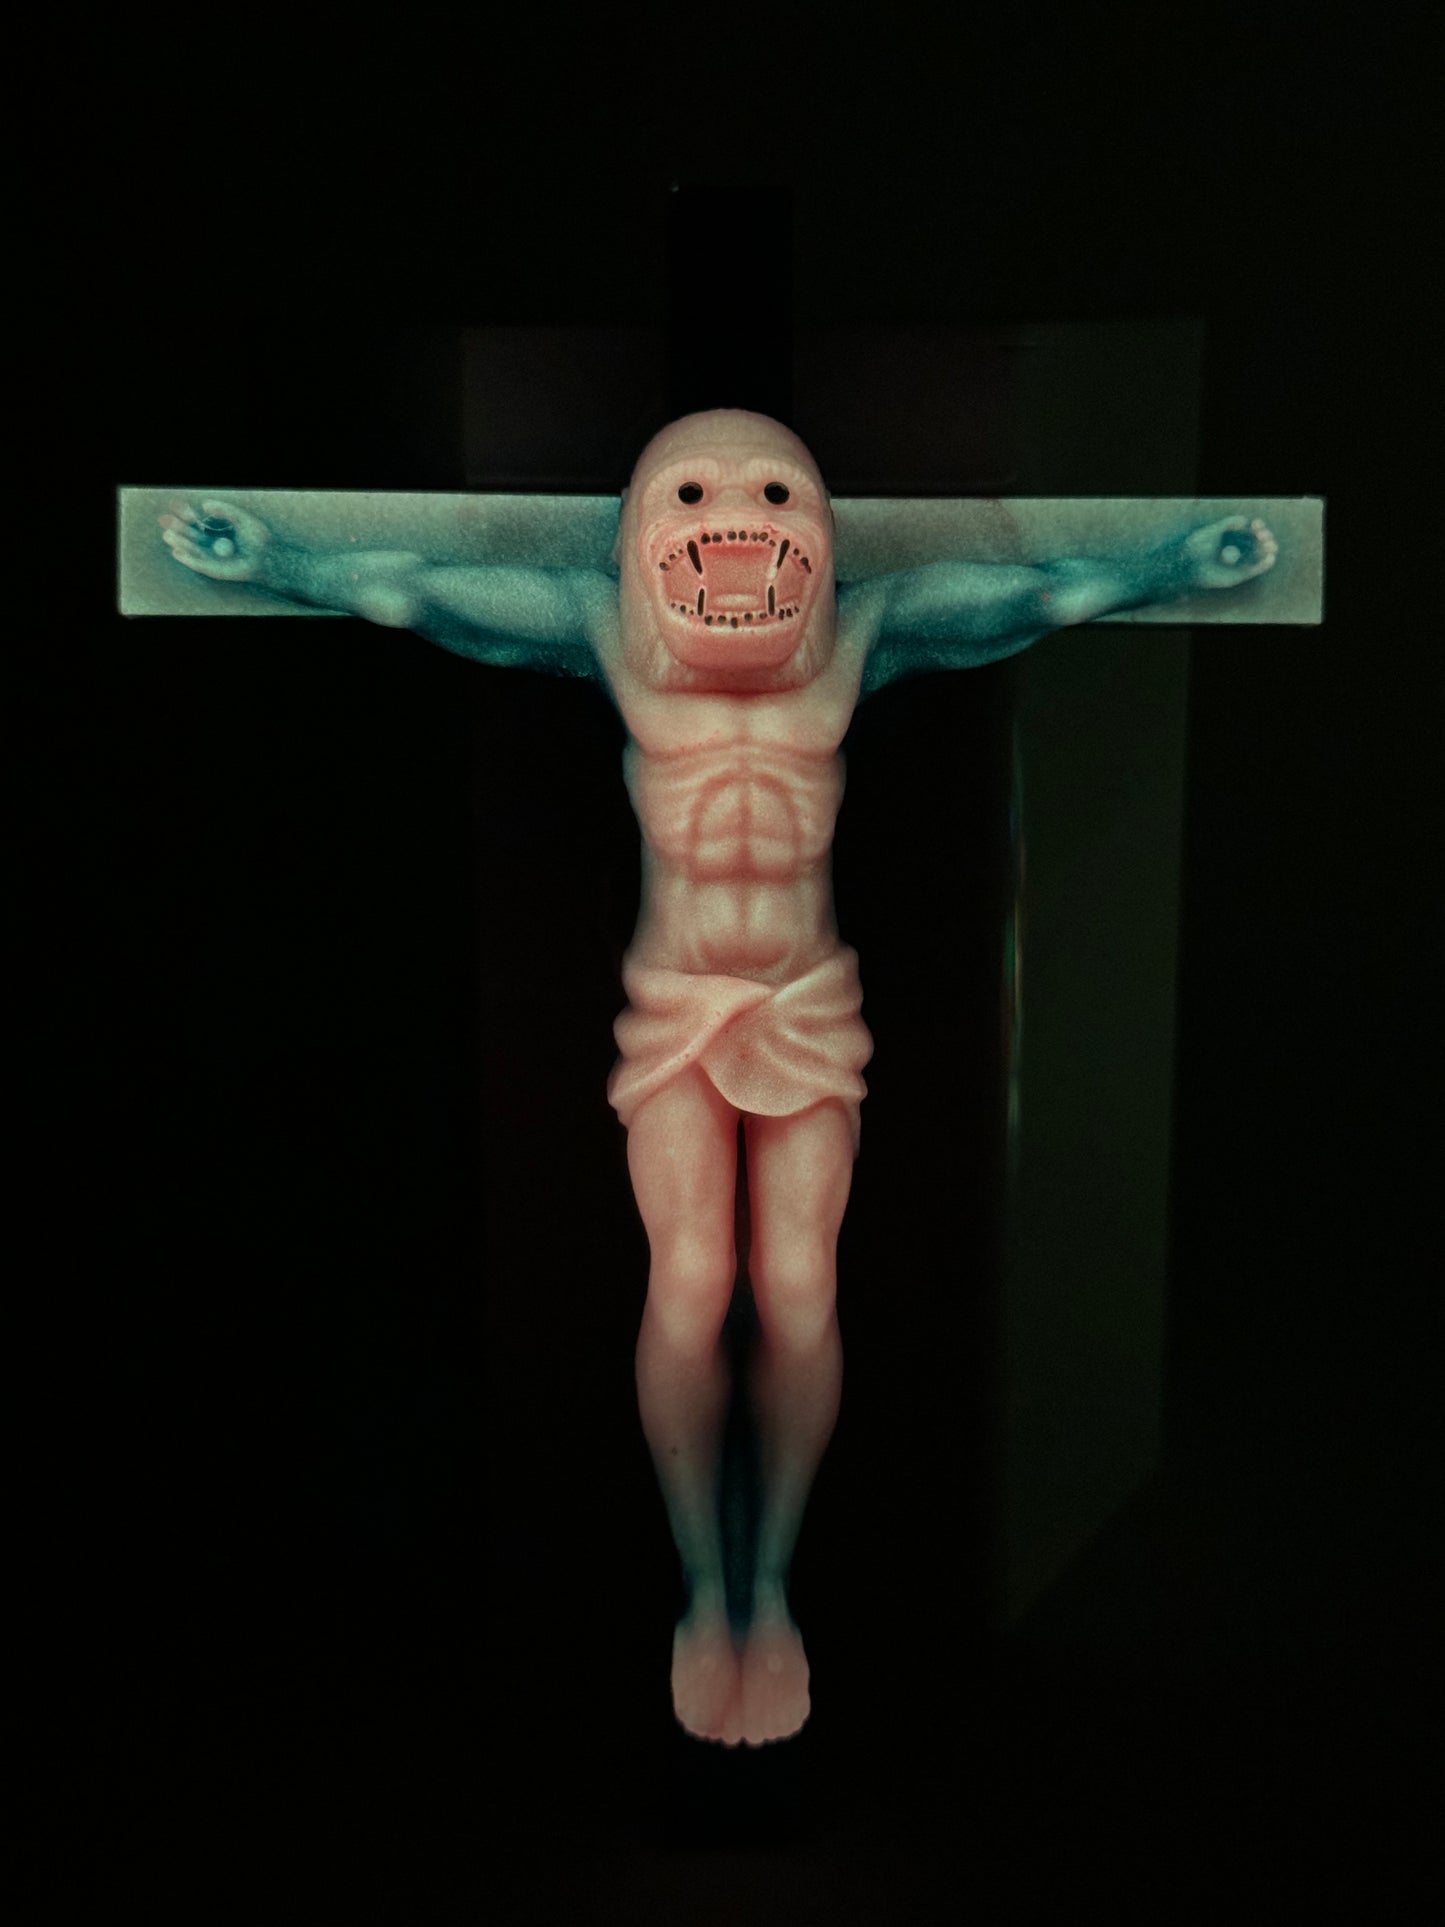 Christ on the Cross but he is an Ape, Magical Toy: God is a Mutation